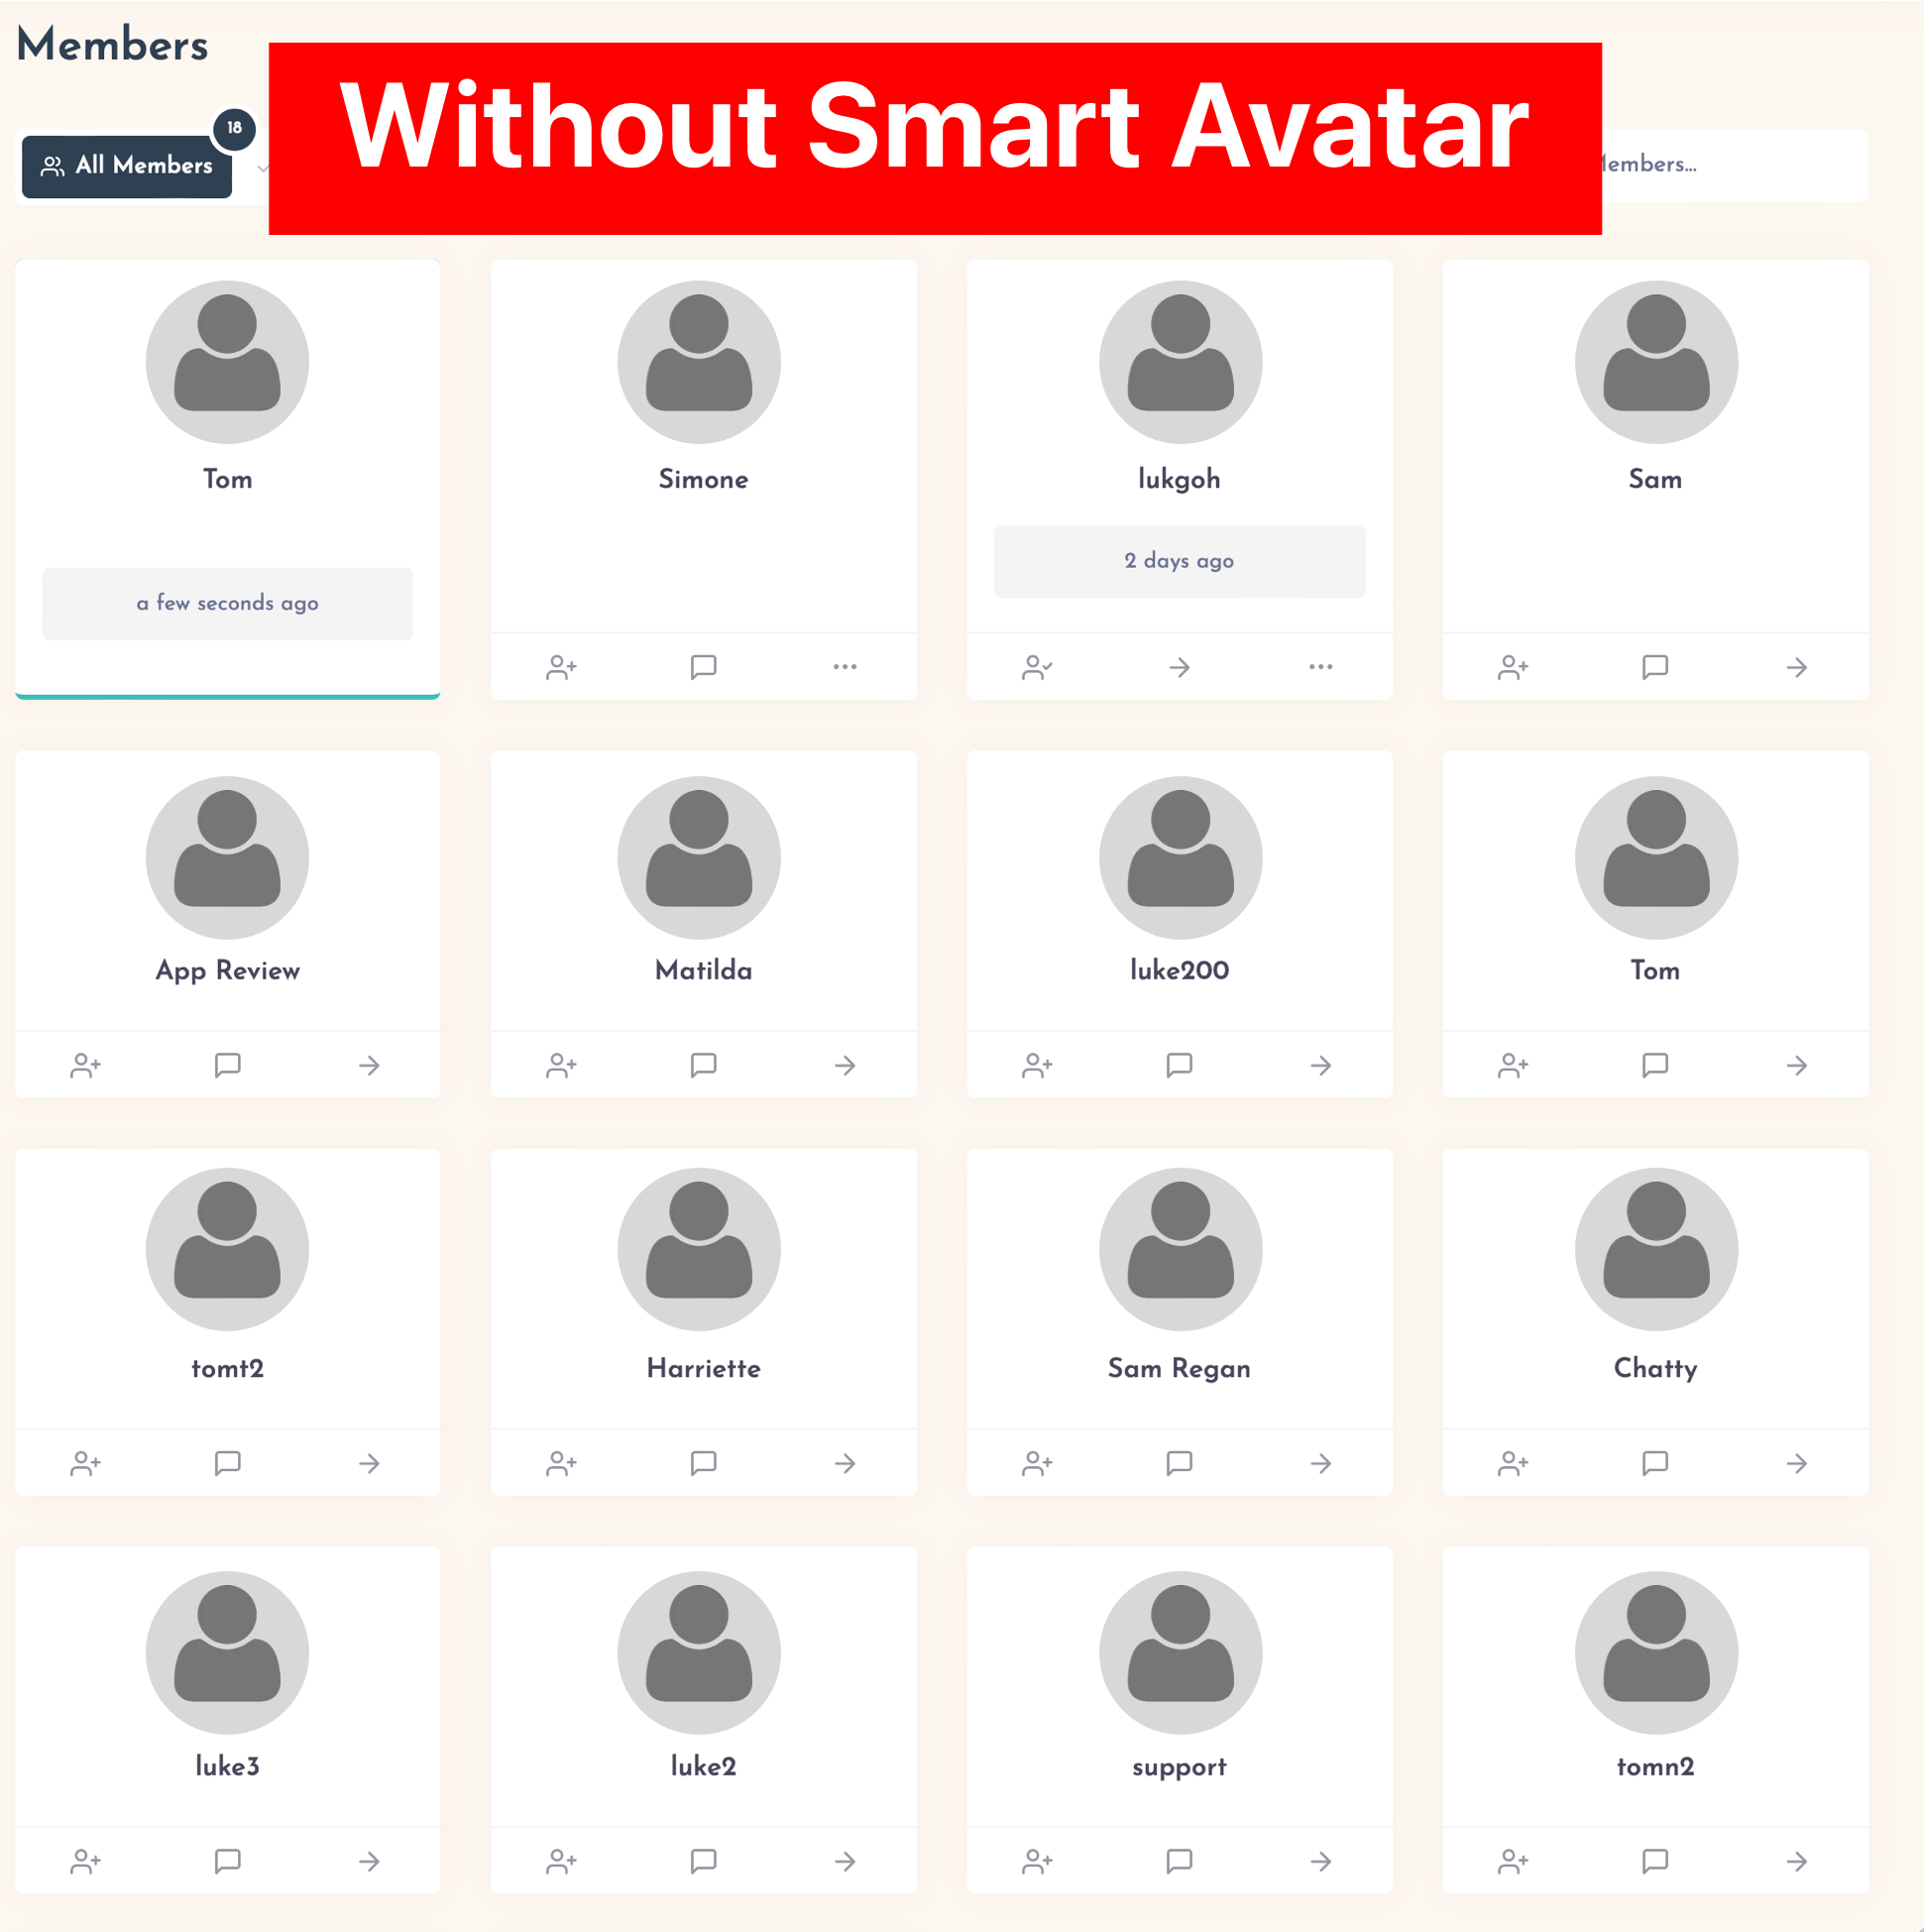 The members view without Smart Avatars installed.